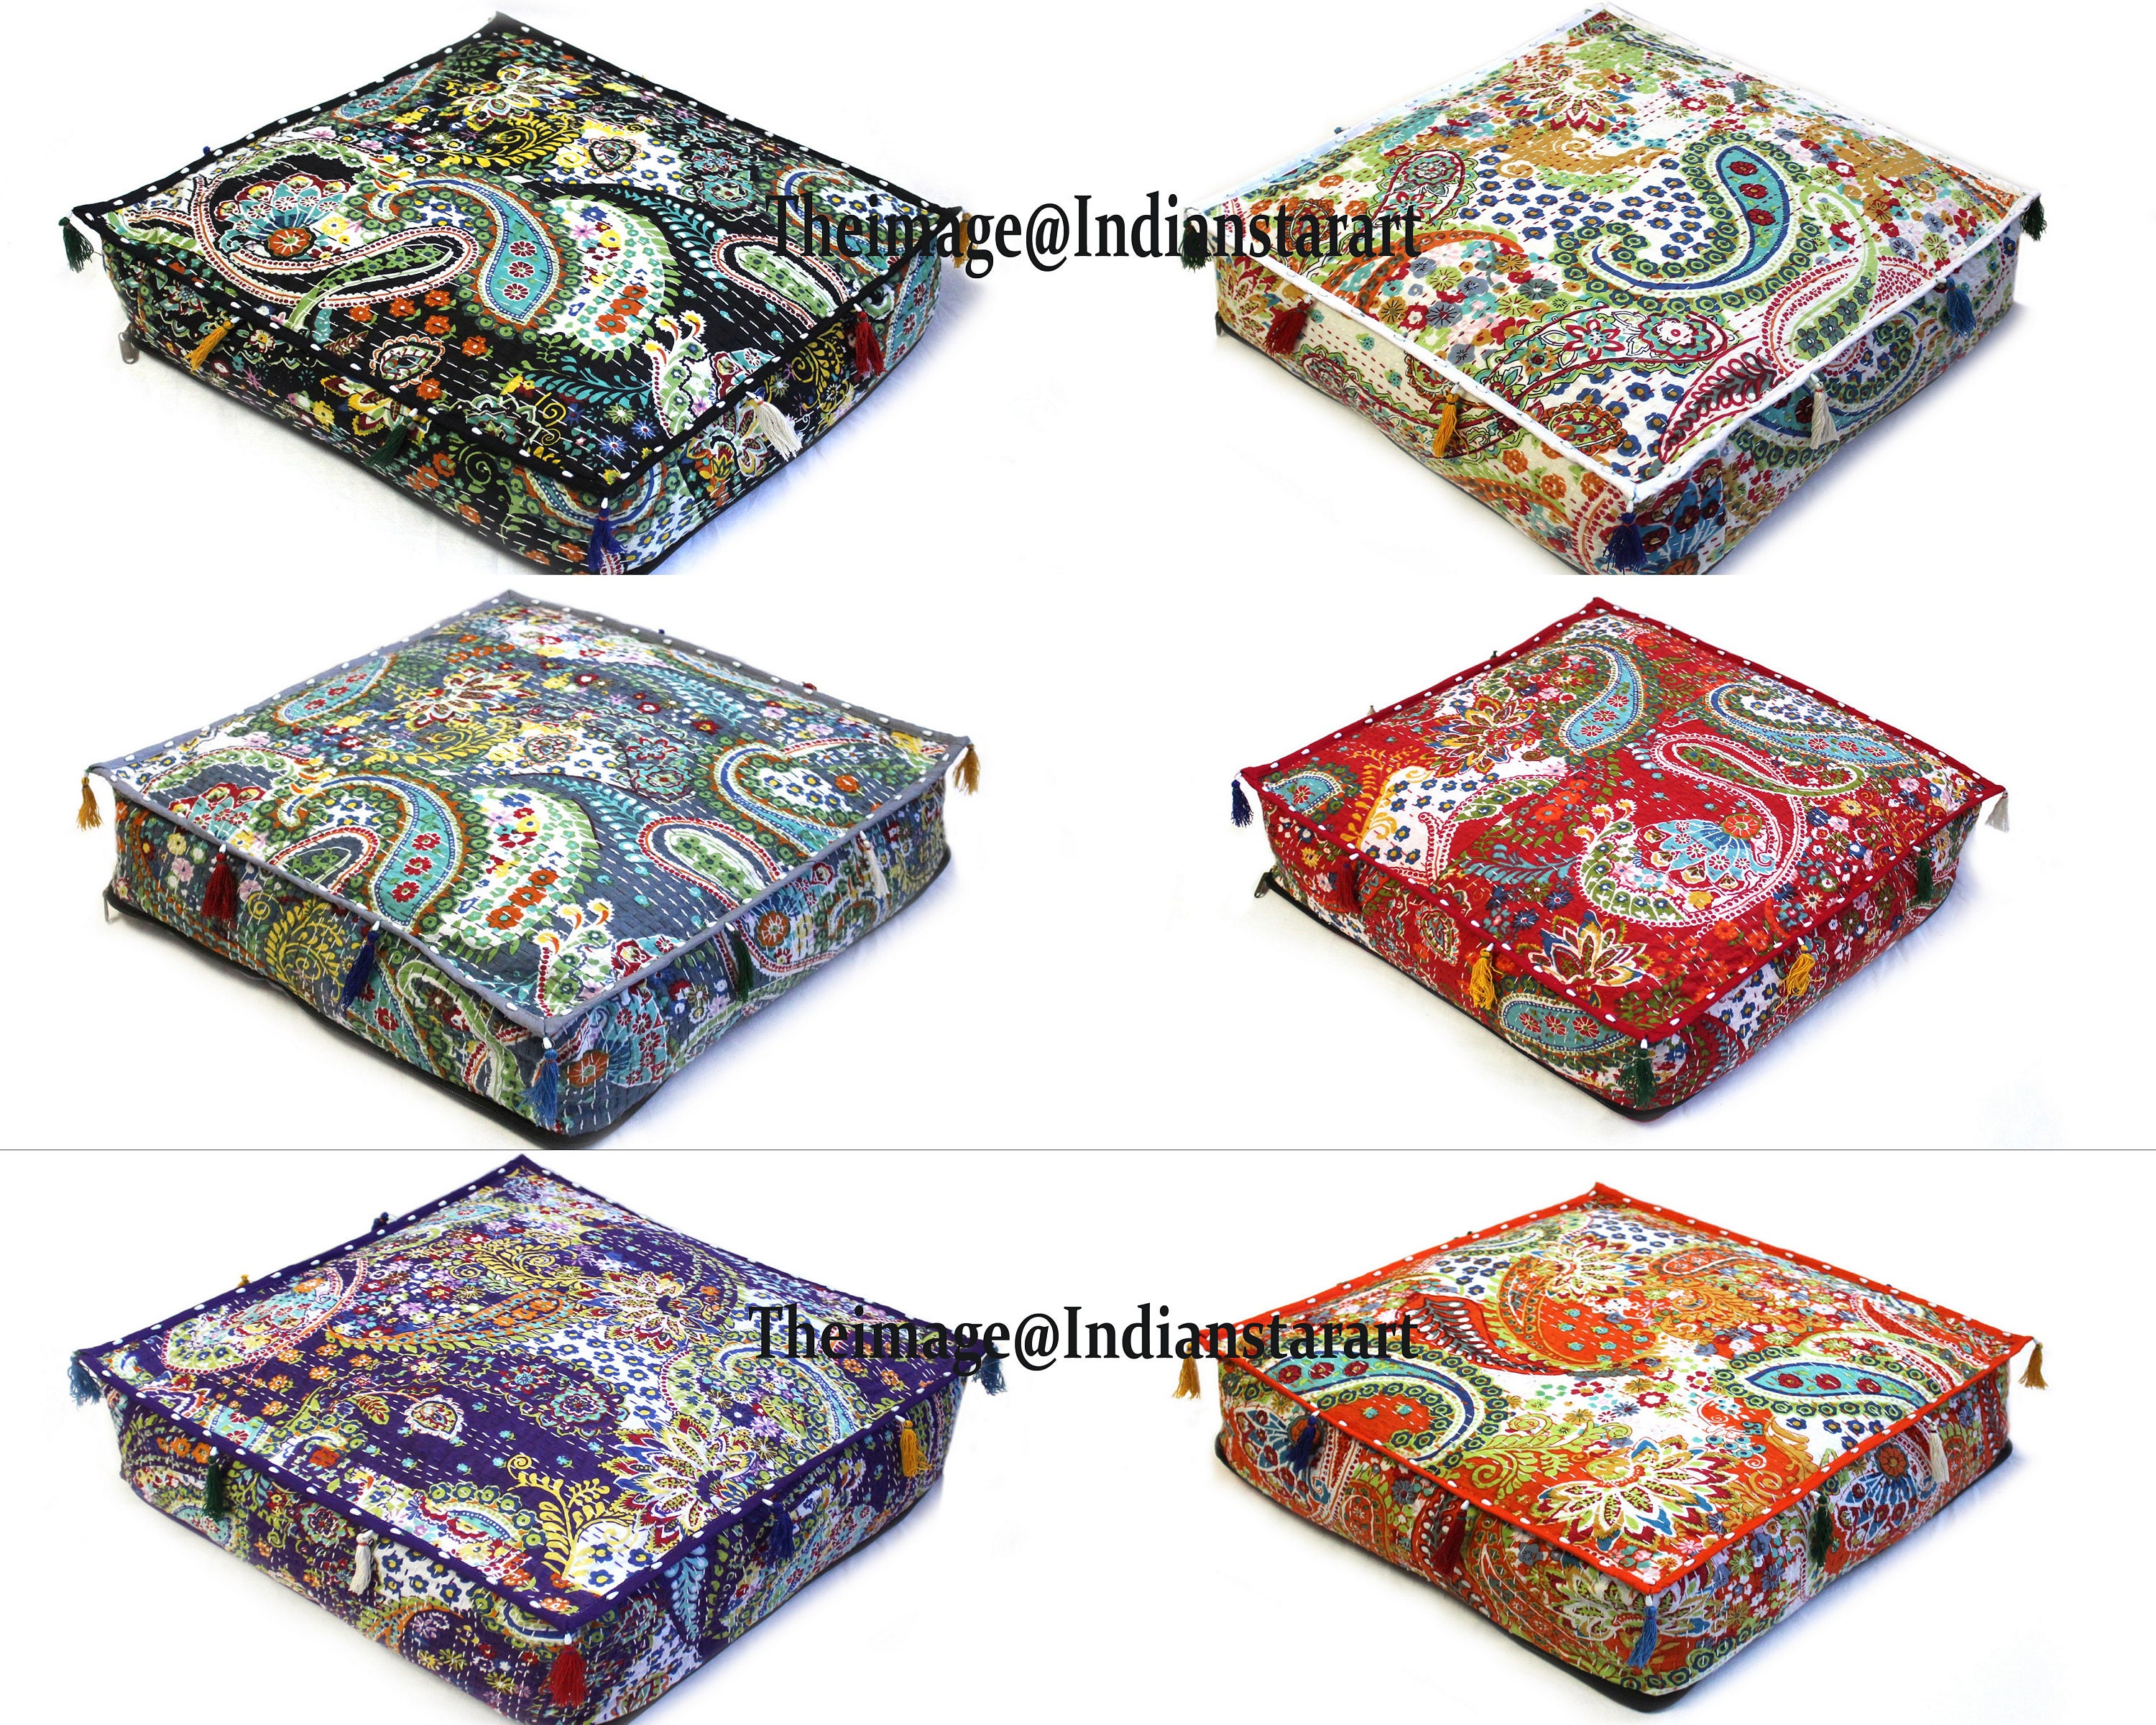 Indian Paisley 32" Inches Handmade Paisley Square Floor Pillow Box Cushion Cover 